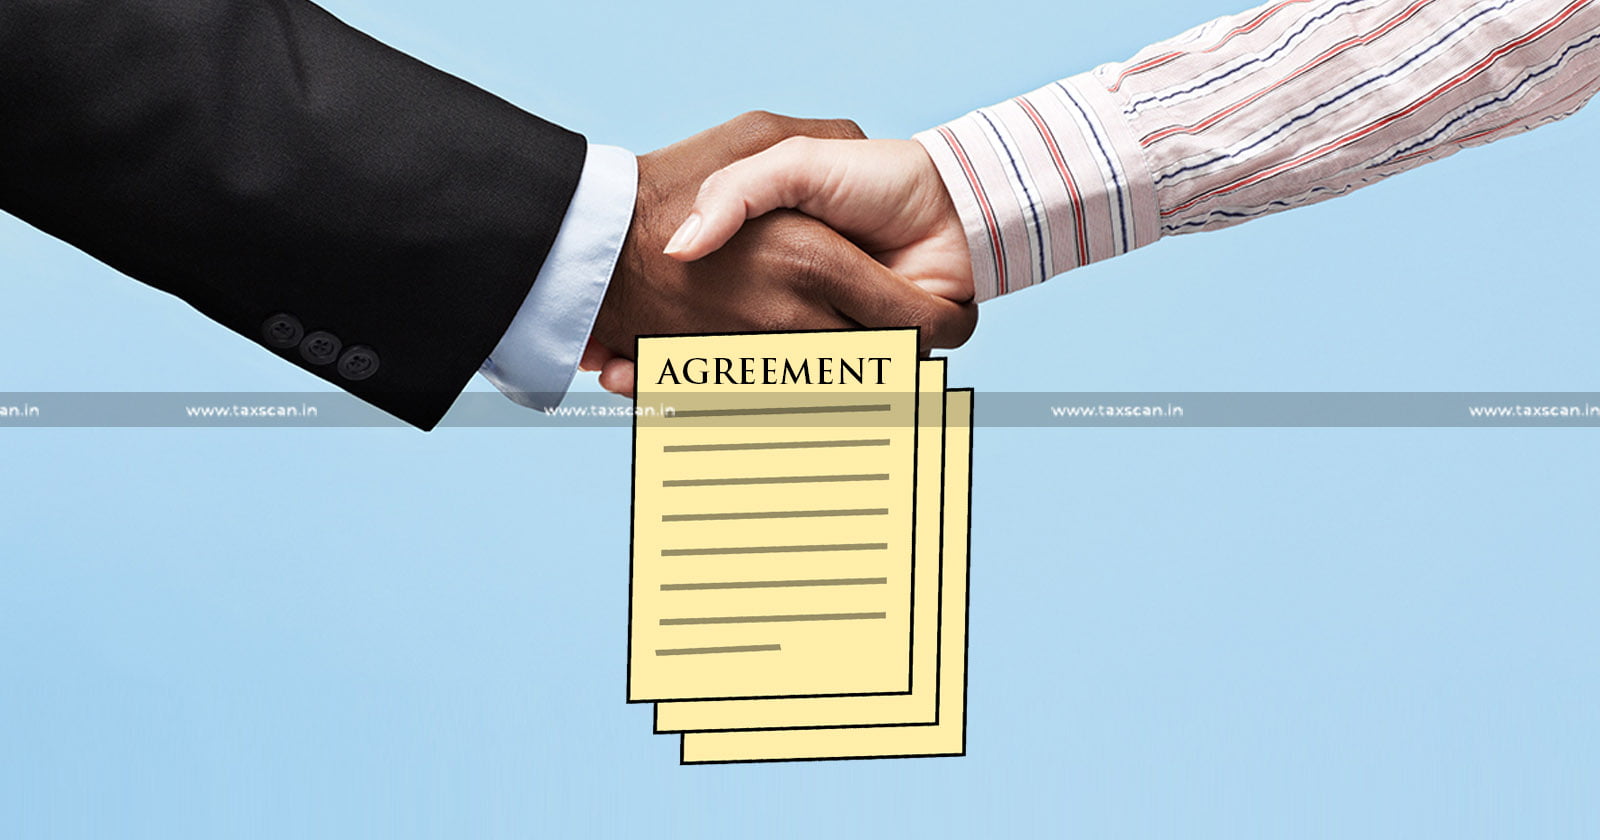 Cost of New Property - Collaboration Agreement - New Property - ITAT - taxscan